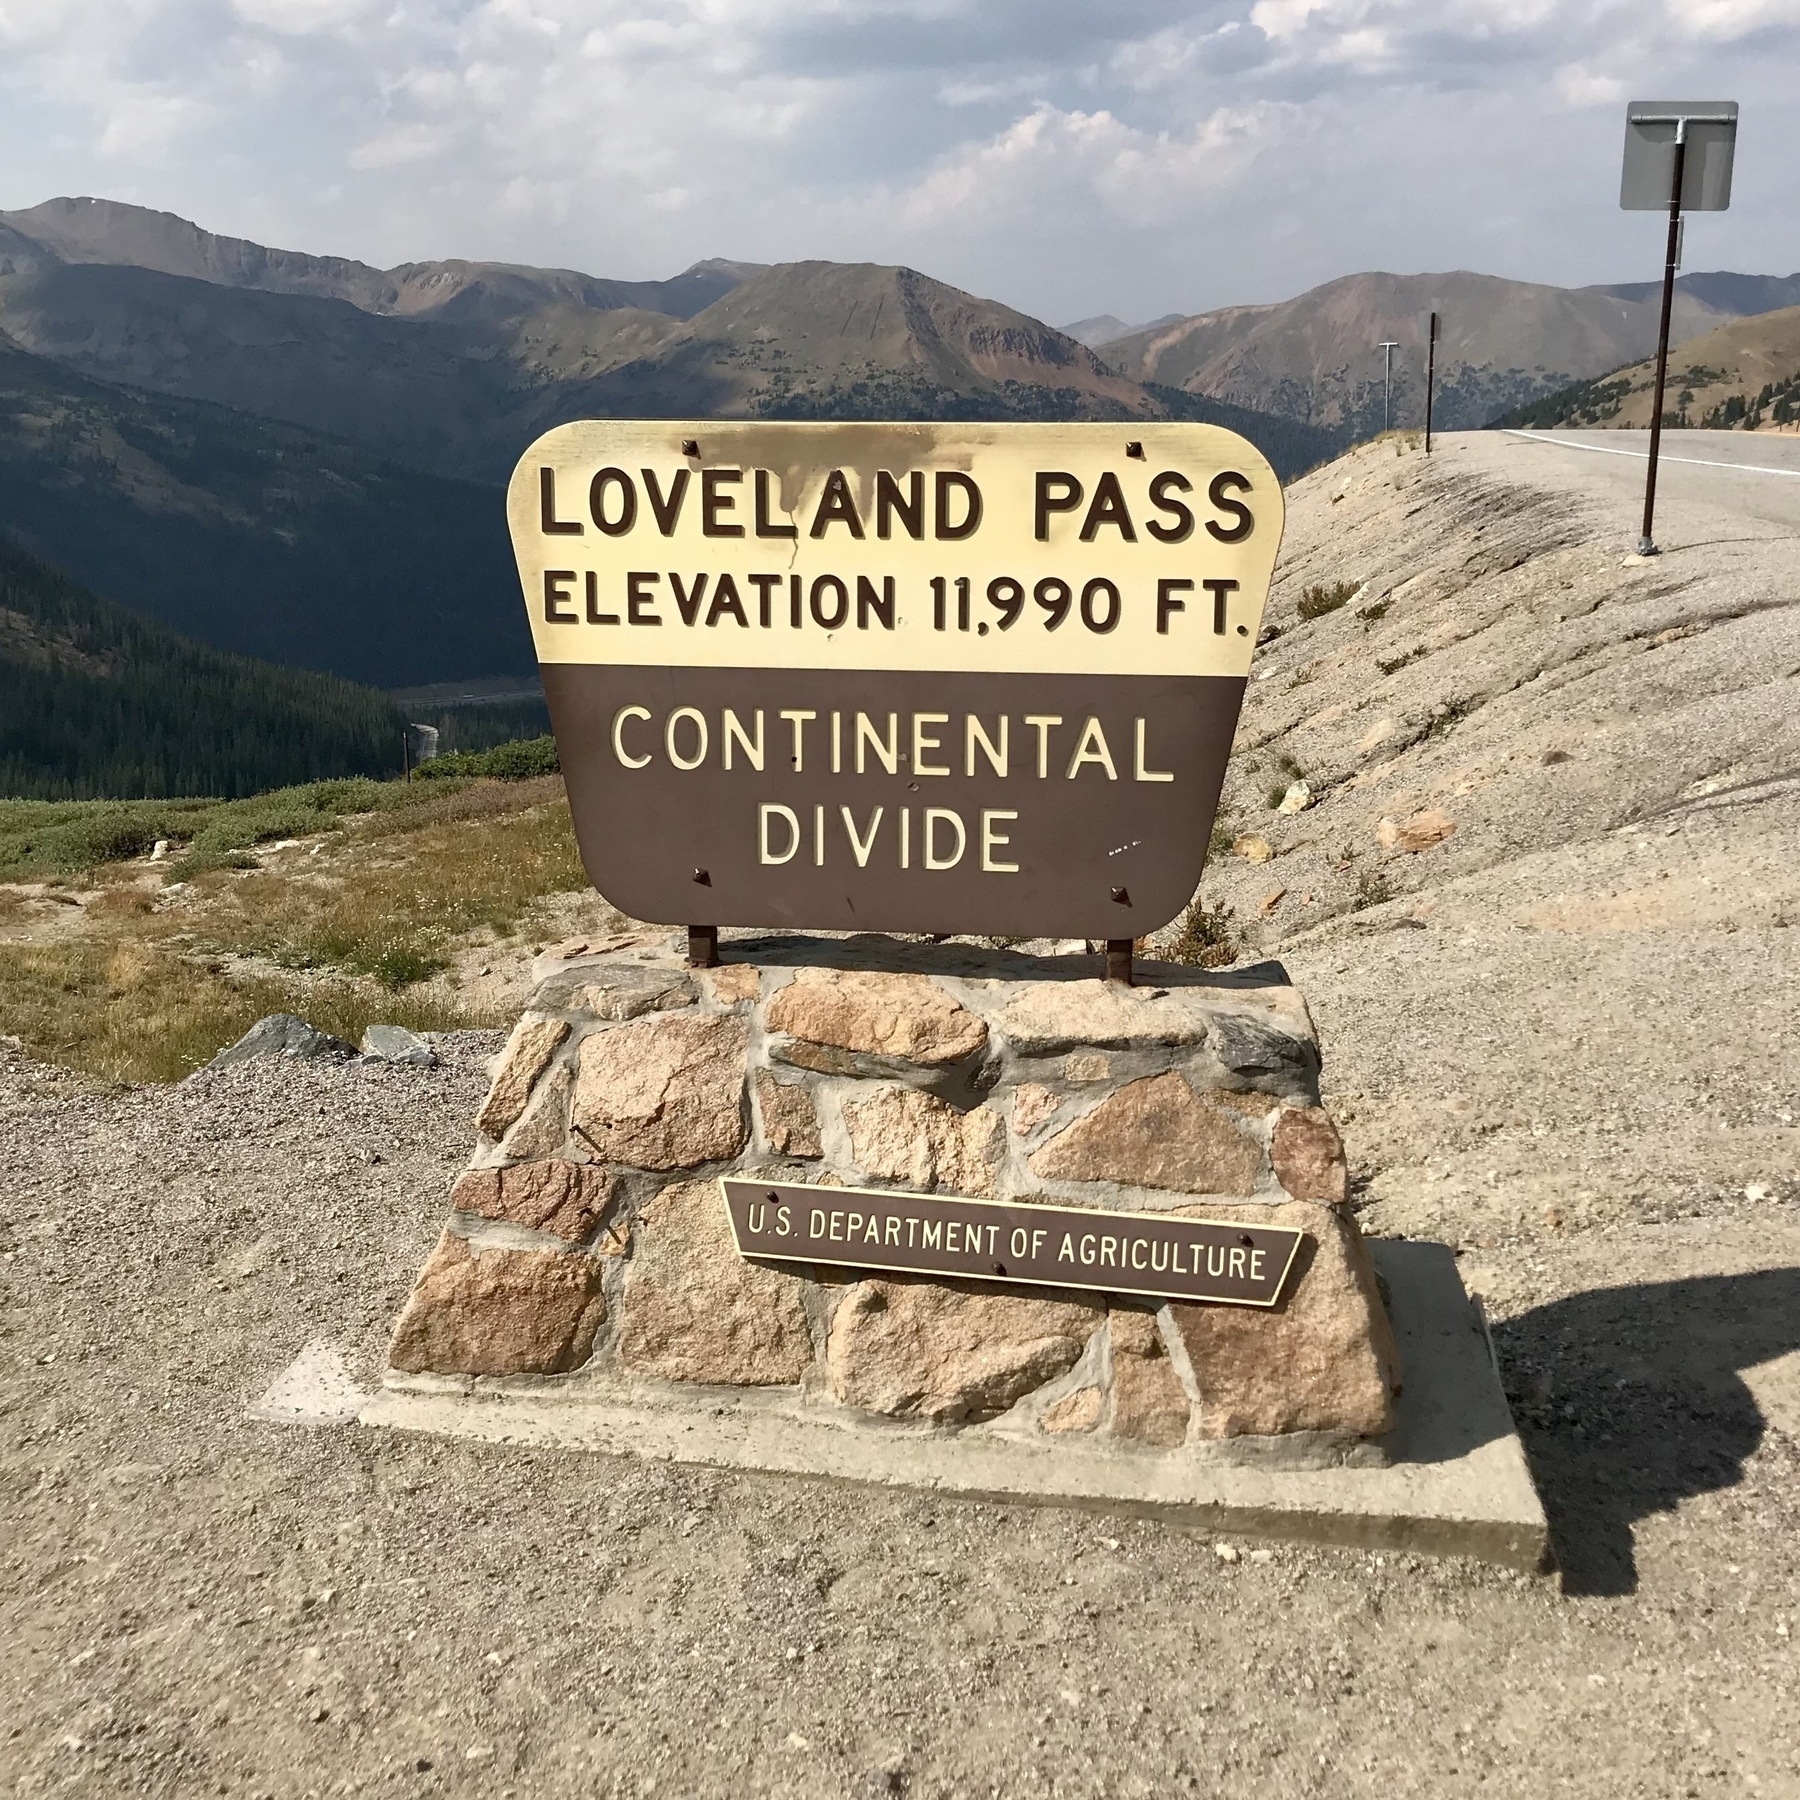 A vintage wood and stone sign from the US Department of Agriculture. Loveland Pass. Elevation 11,990 feet. Continental Divide.